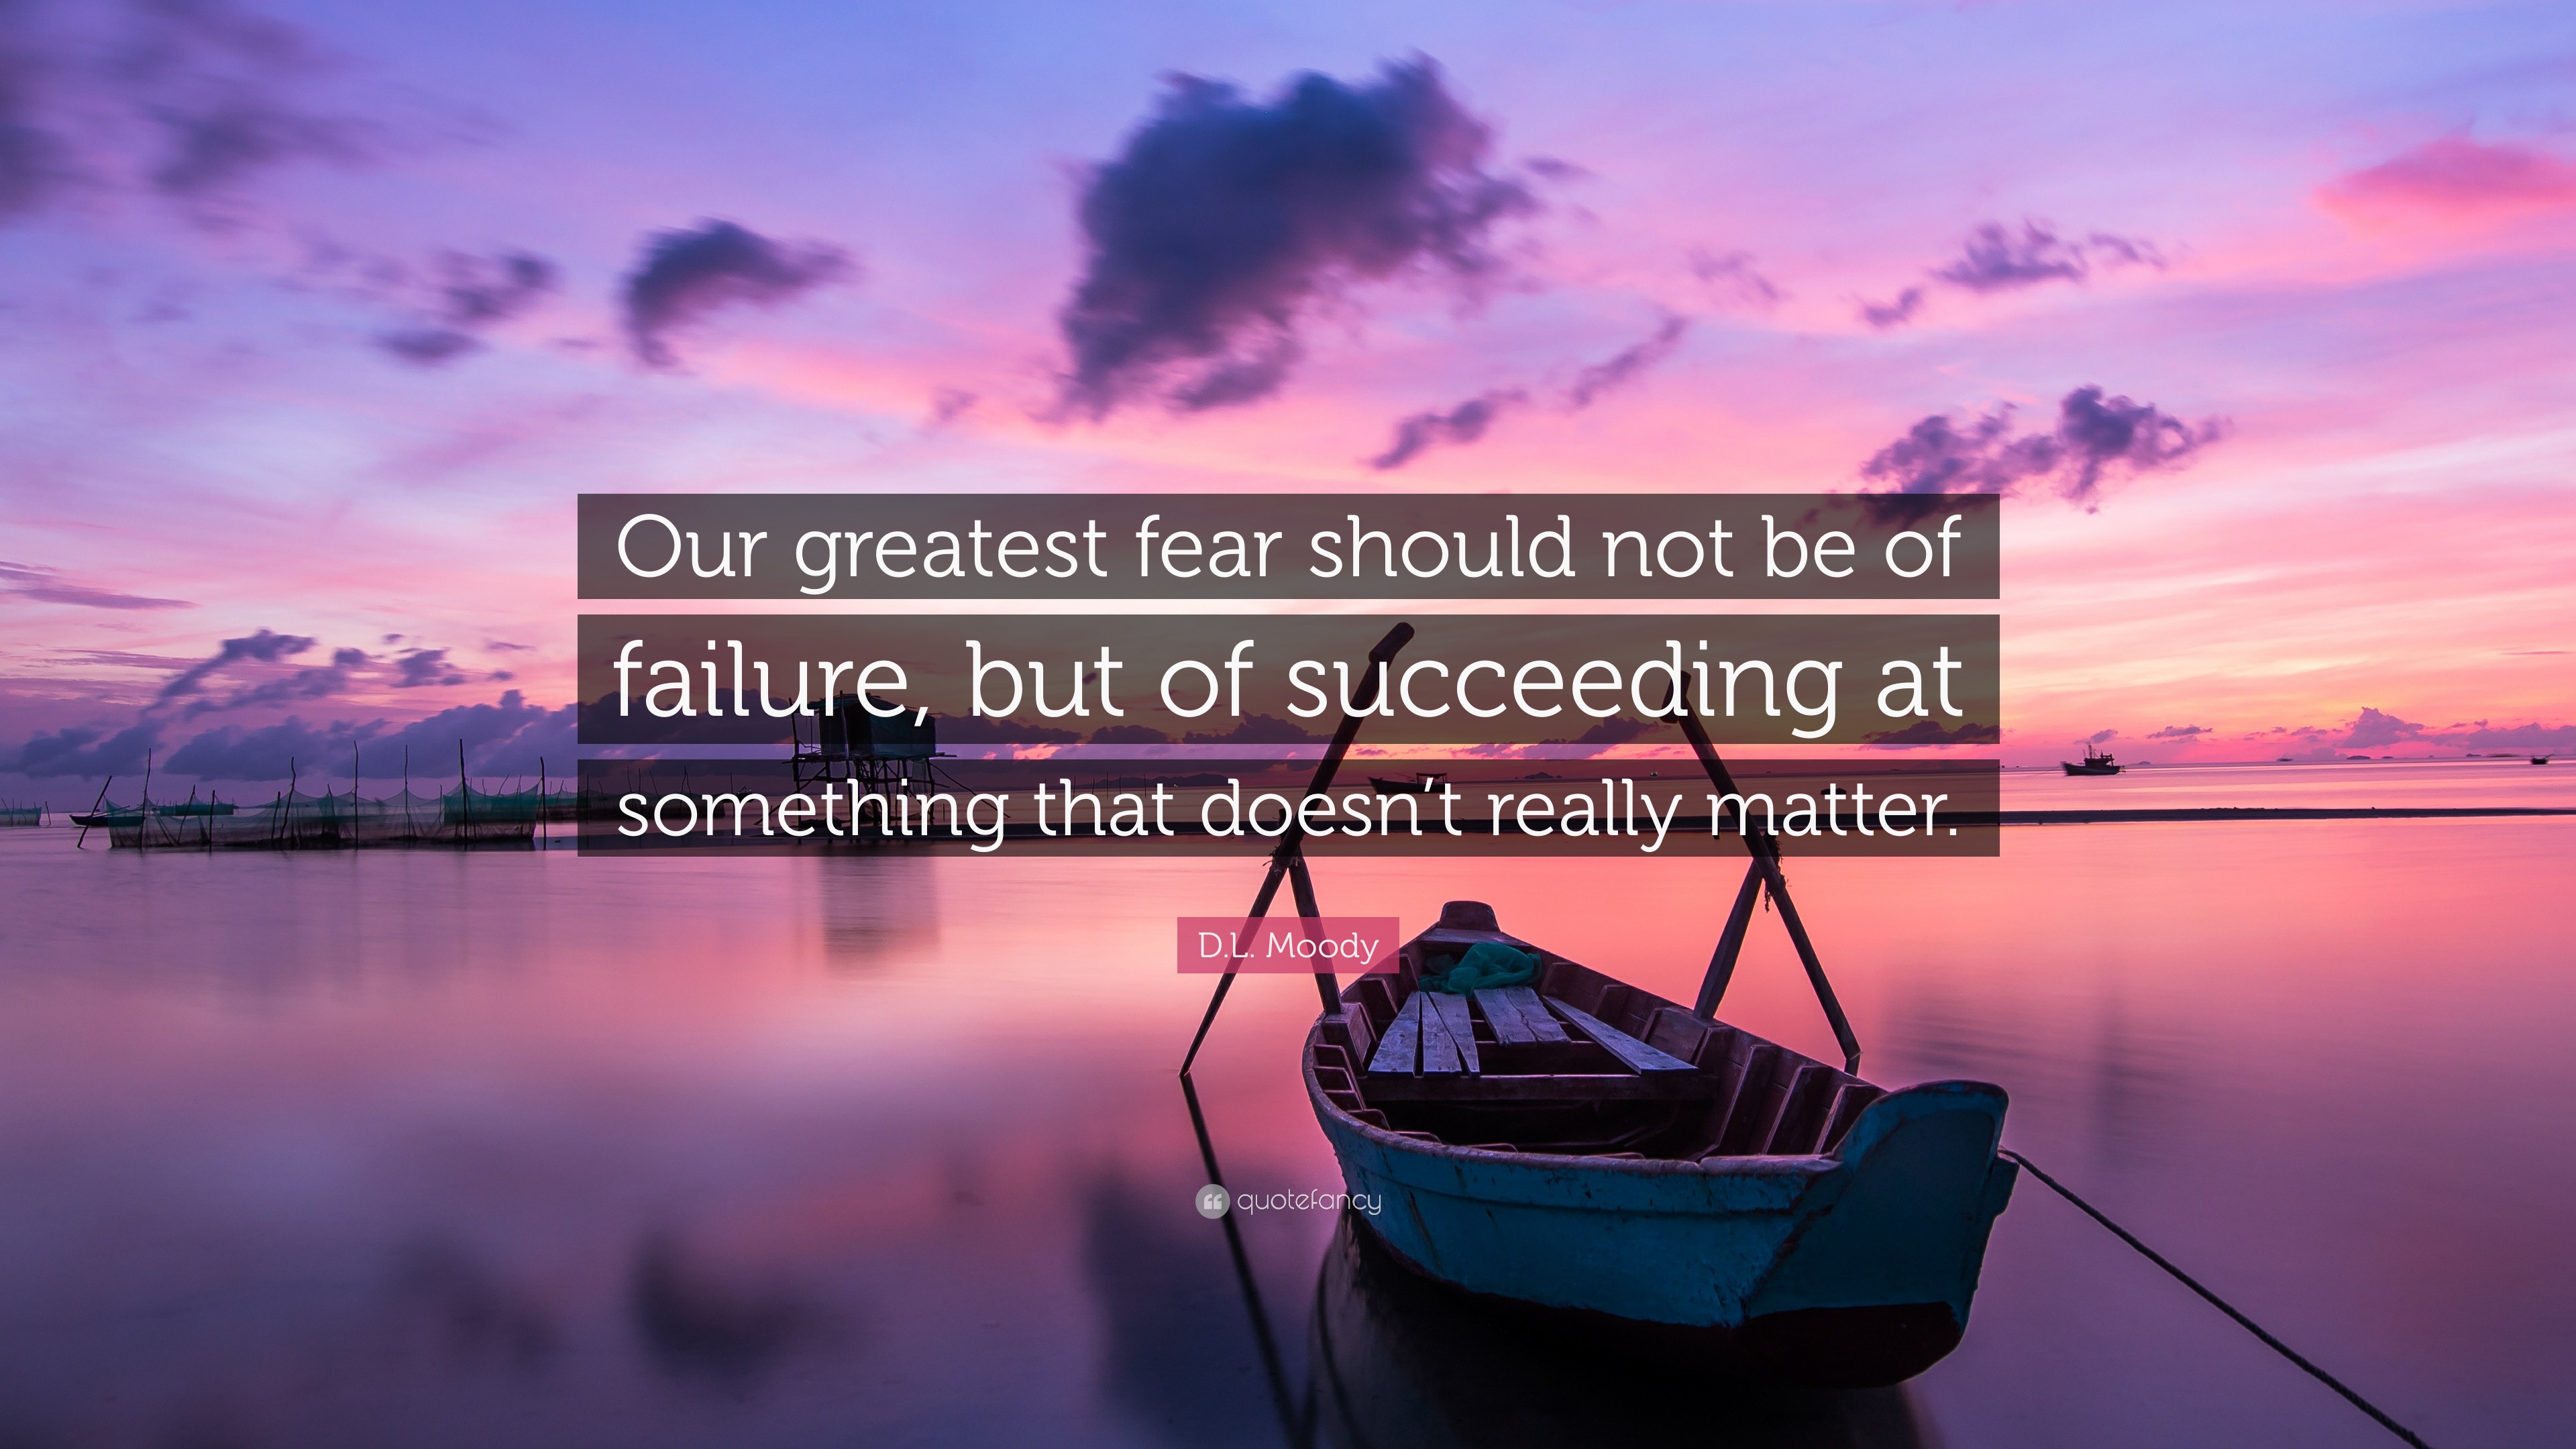 D.L. Moody Quote: “Our greatest fear should not be of failure, but of